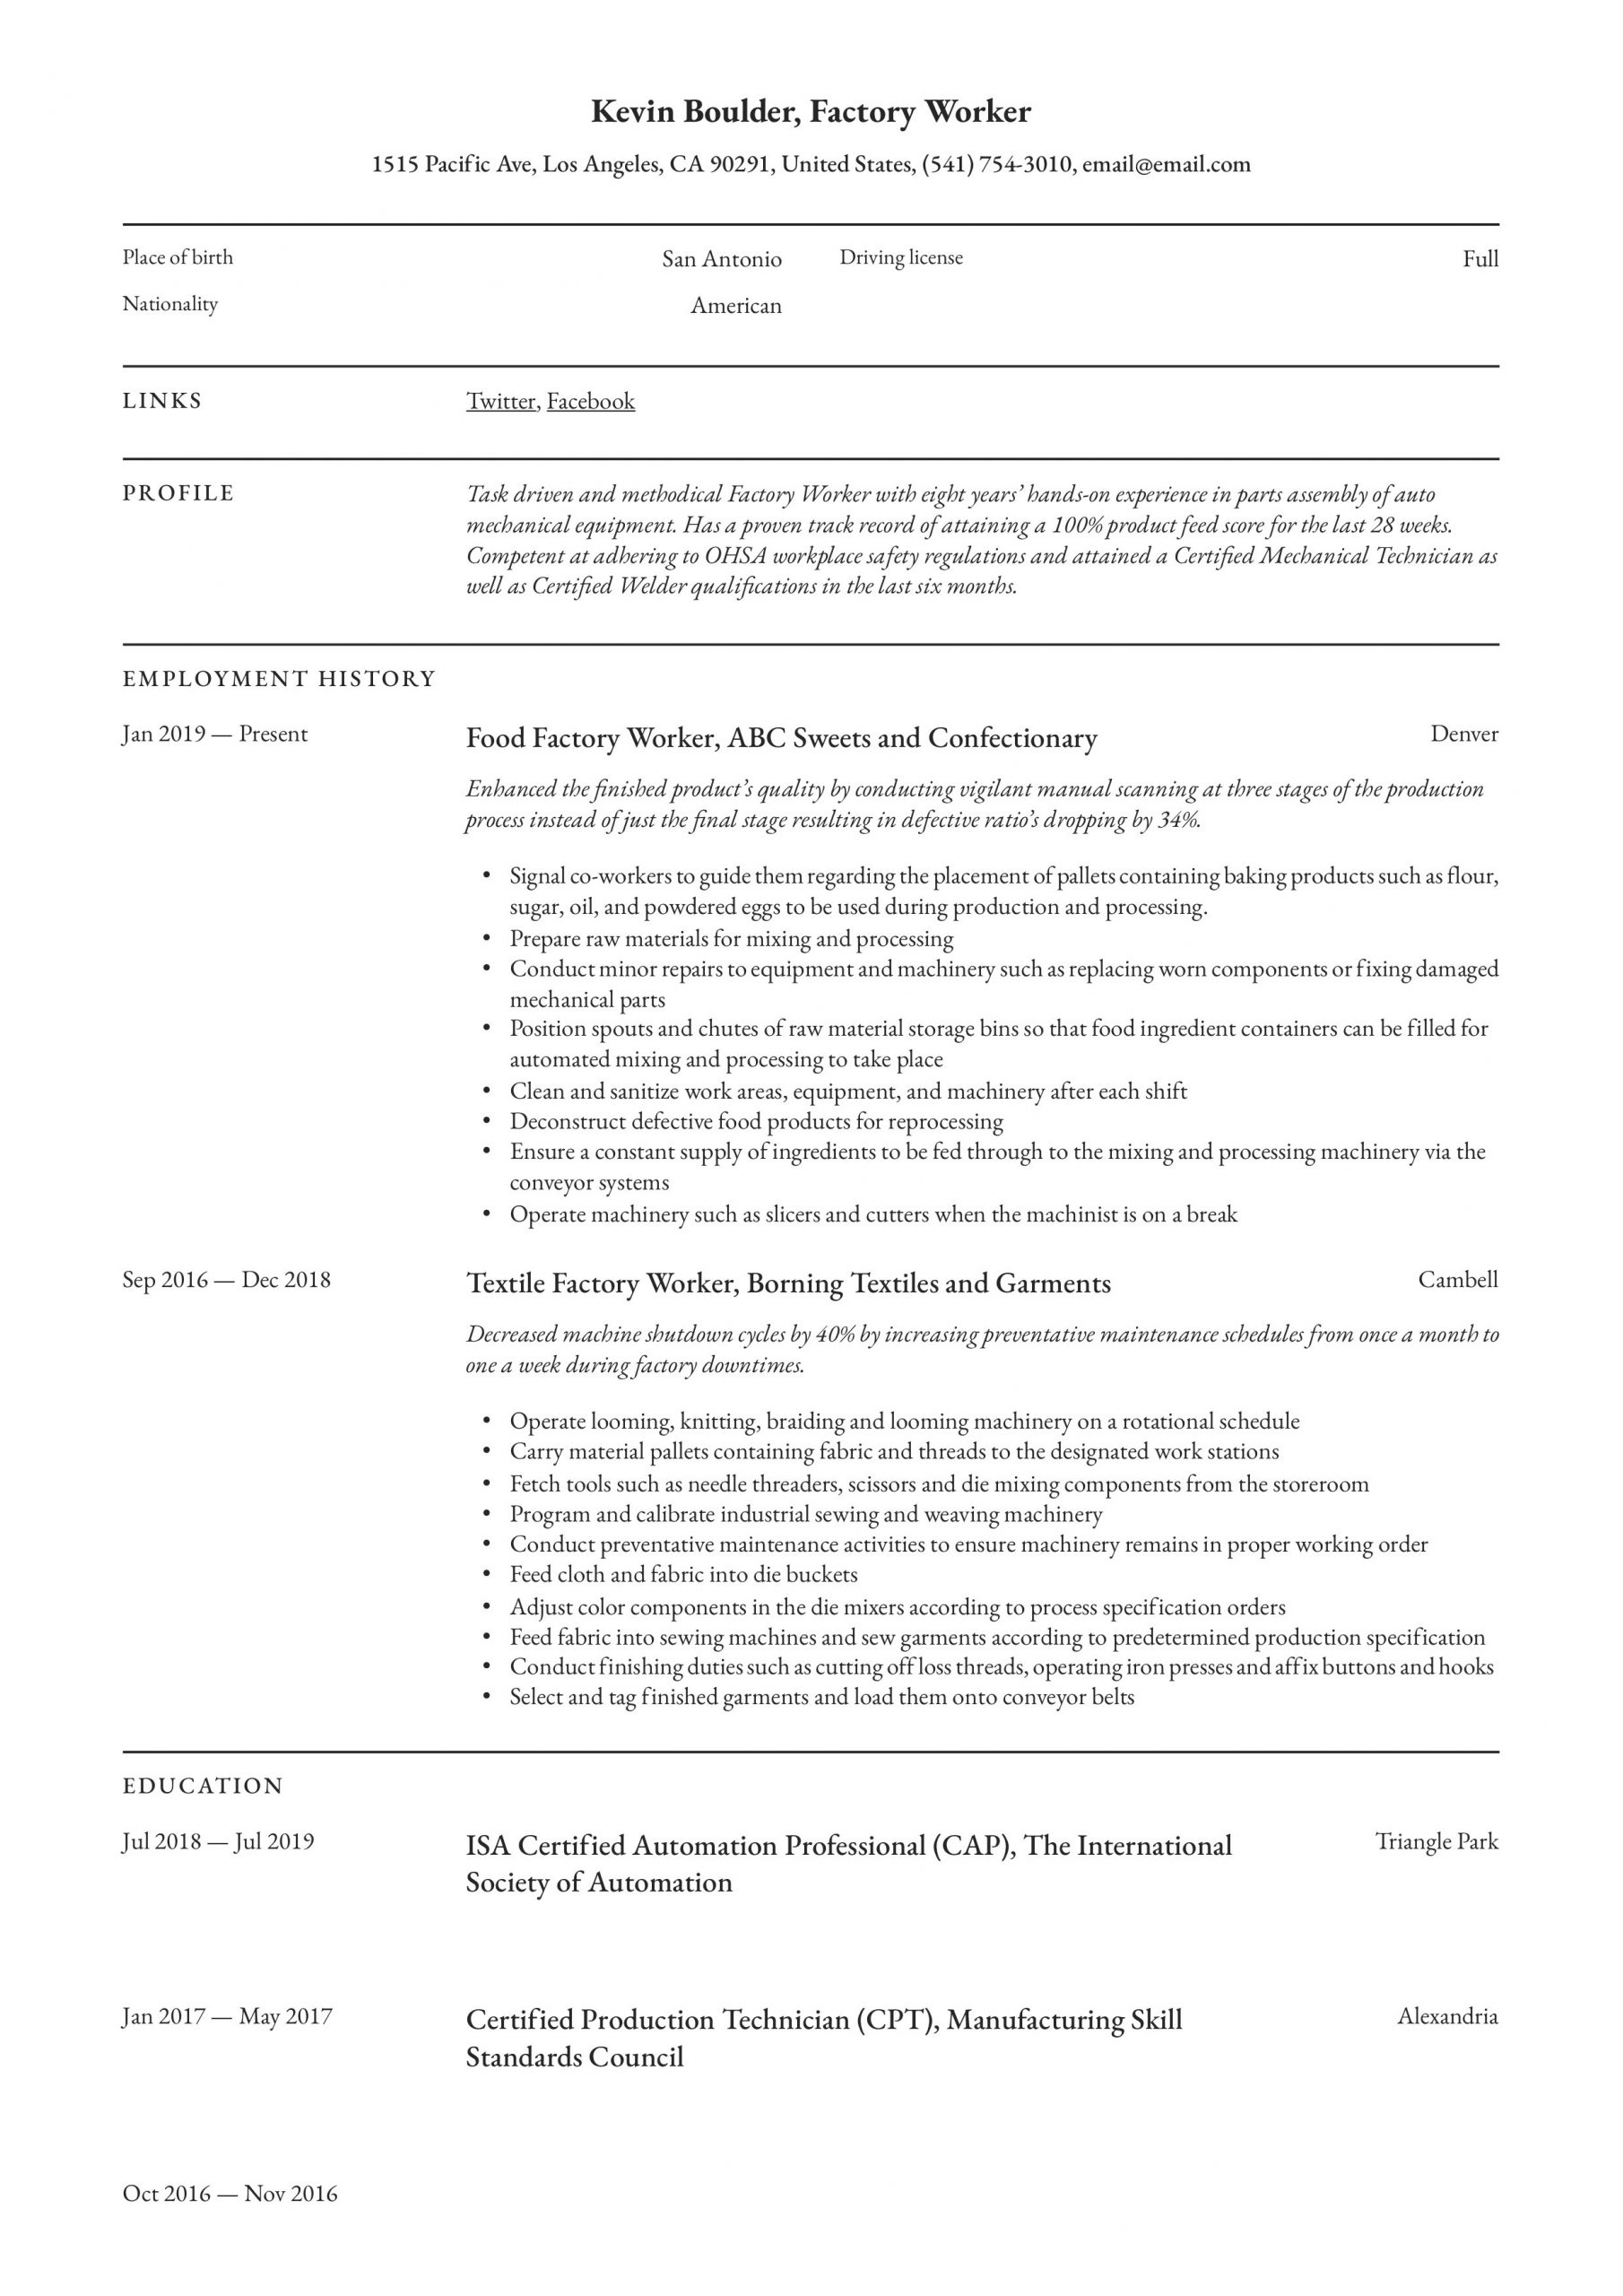 Sample Resume for Pharmaceutical Manufacturing Technician Factory Worker Resume & Writing Guide  12 Resume Examples 2020